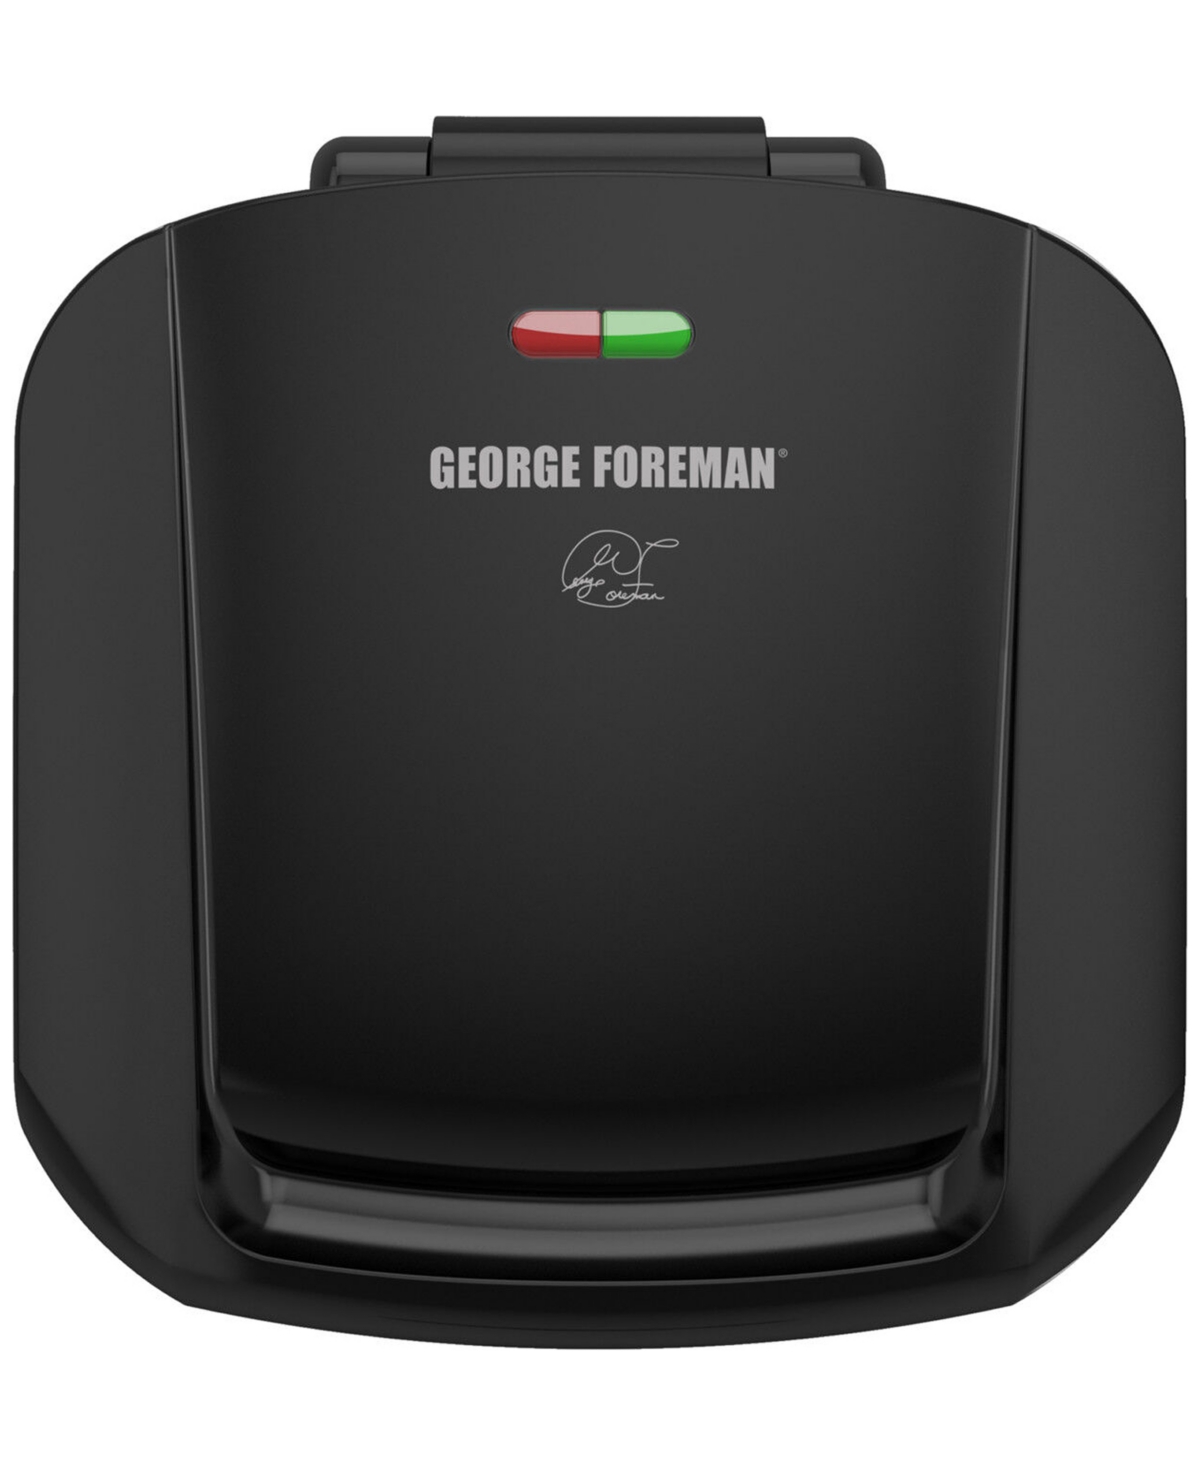 George Foreman 4-serving Electric Grill & Panini Press In Black